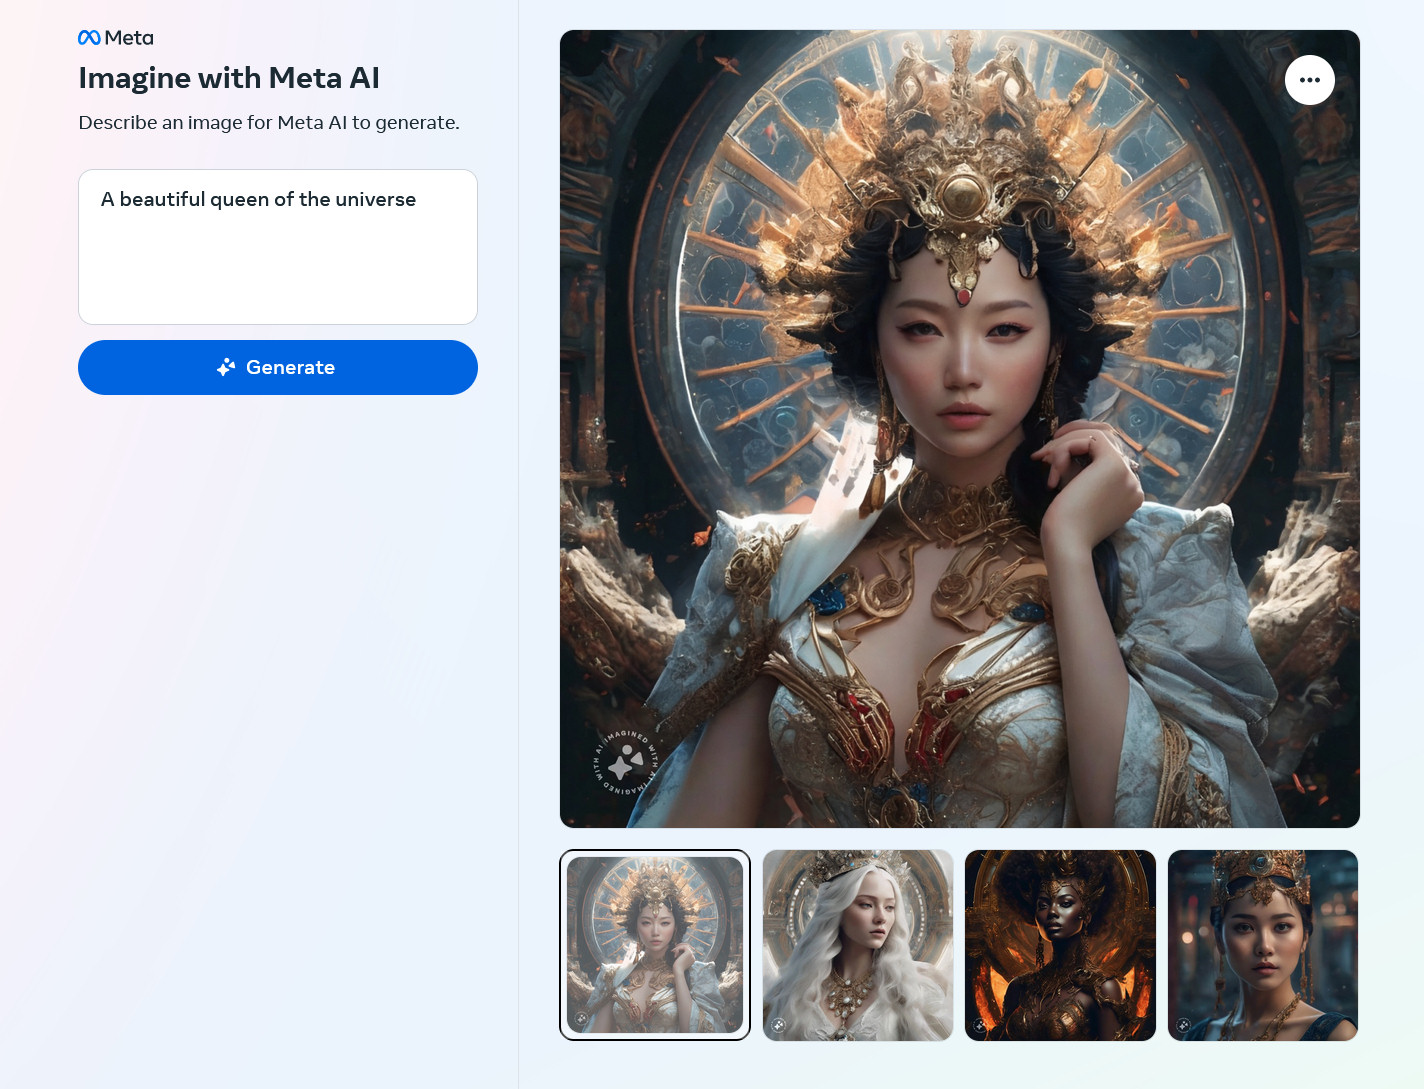 AI-generated images of a beautiful queen of the universe created by Meta Emu on the Imagine with Meta AI website.